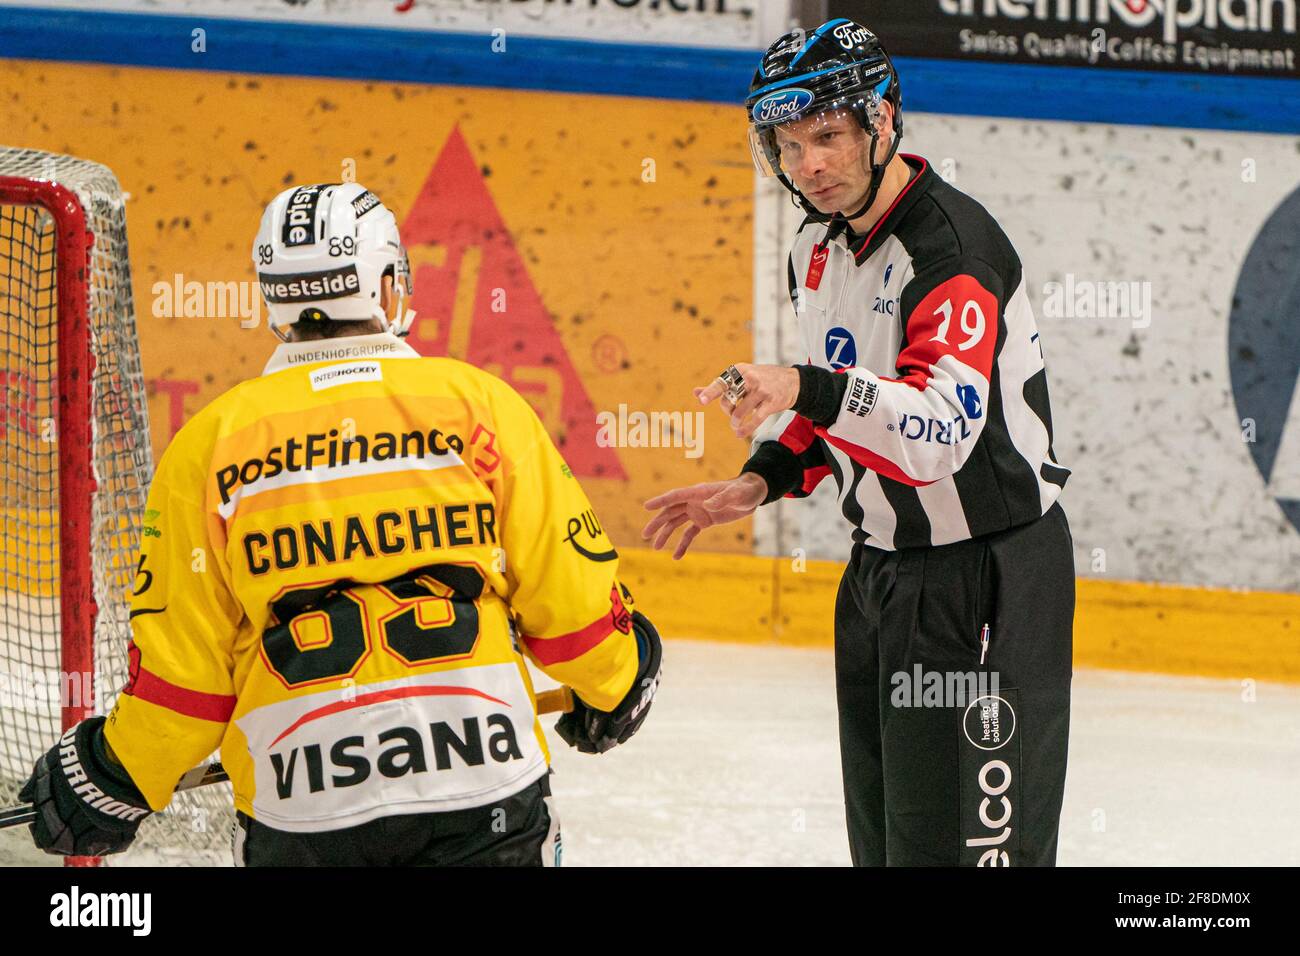 Bossard Arena, Zug, April 13th, 2021  Referee Nicolas Fluri (19) rightly points # 89 Cory Conacher (Bern) during the National League Playoff quarter final ice hockey game 1 between EV Zug and SC Bern on April 13th, 2021 in the Bossard Arena in Zug. (Switzerland/Croatia OUT) Credit: SPP Sport Press Photo. /Alamy Live News Stock Photo